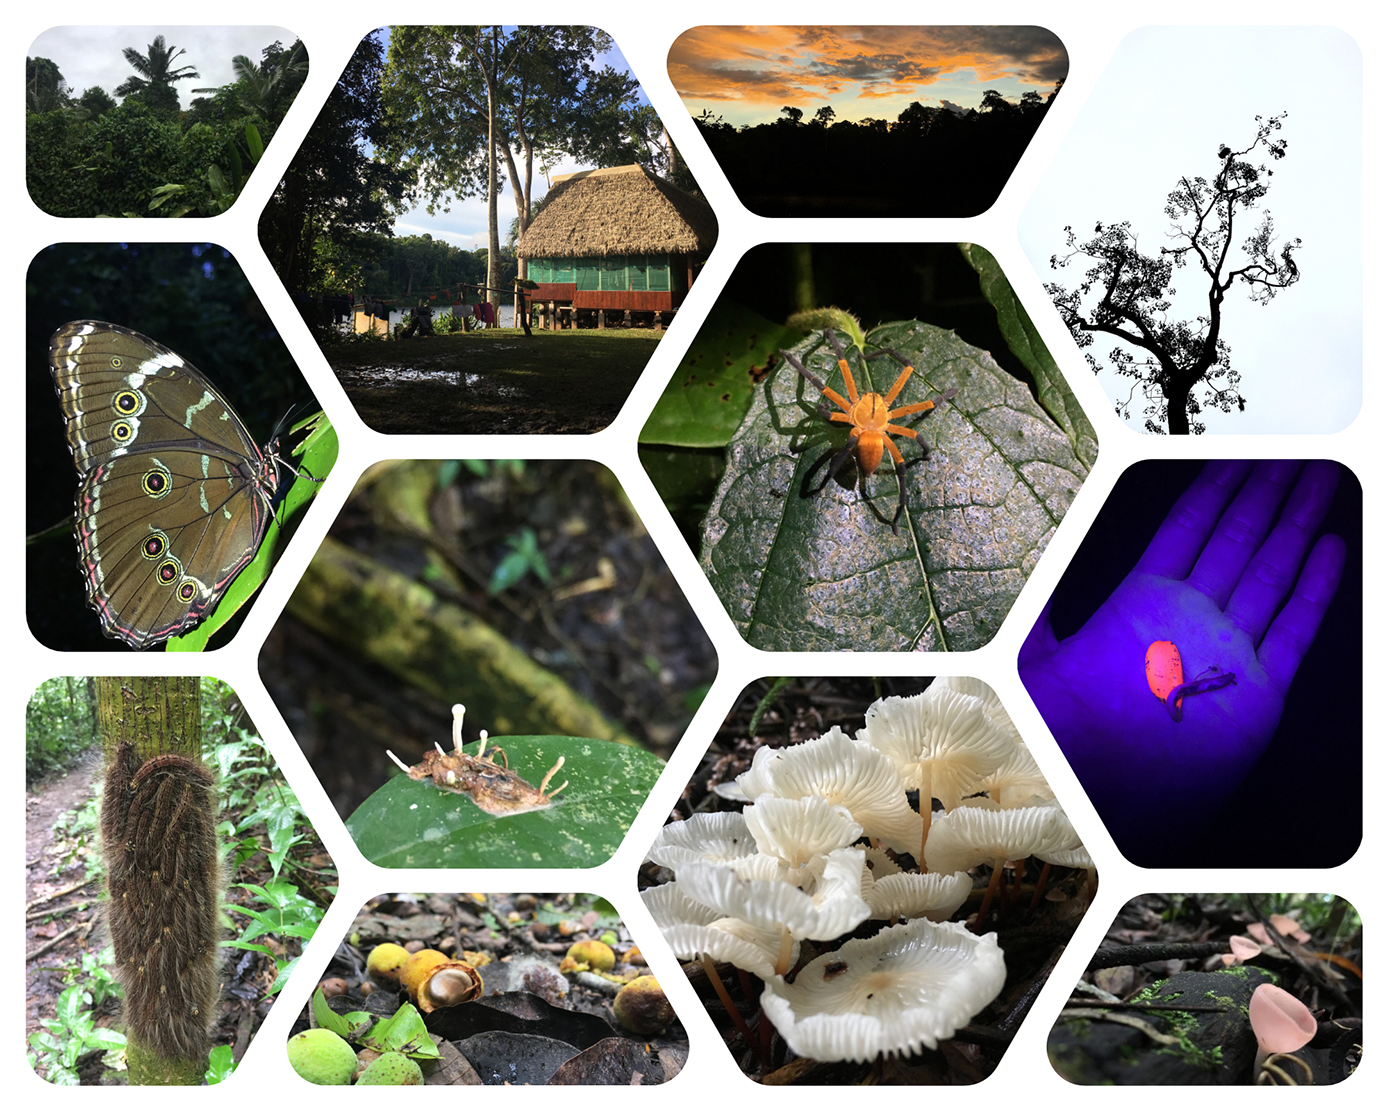 A collage of images of plants from the Amazon rainforest.